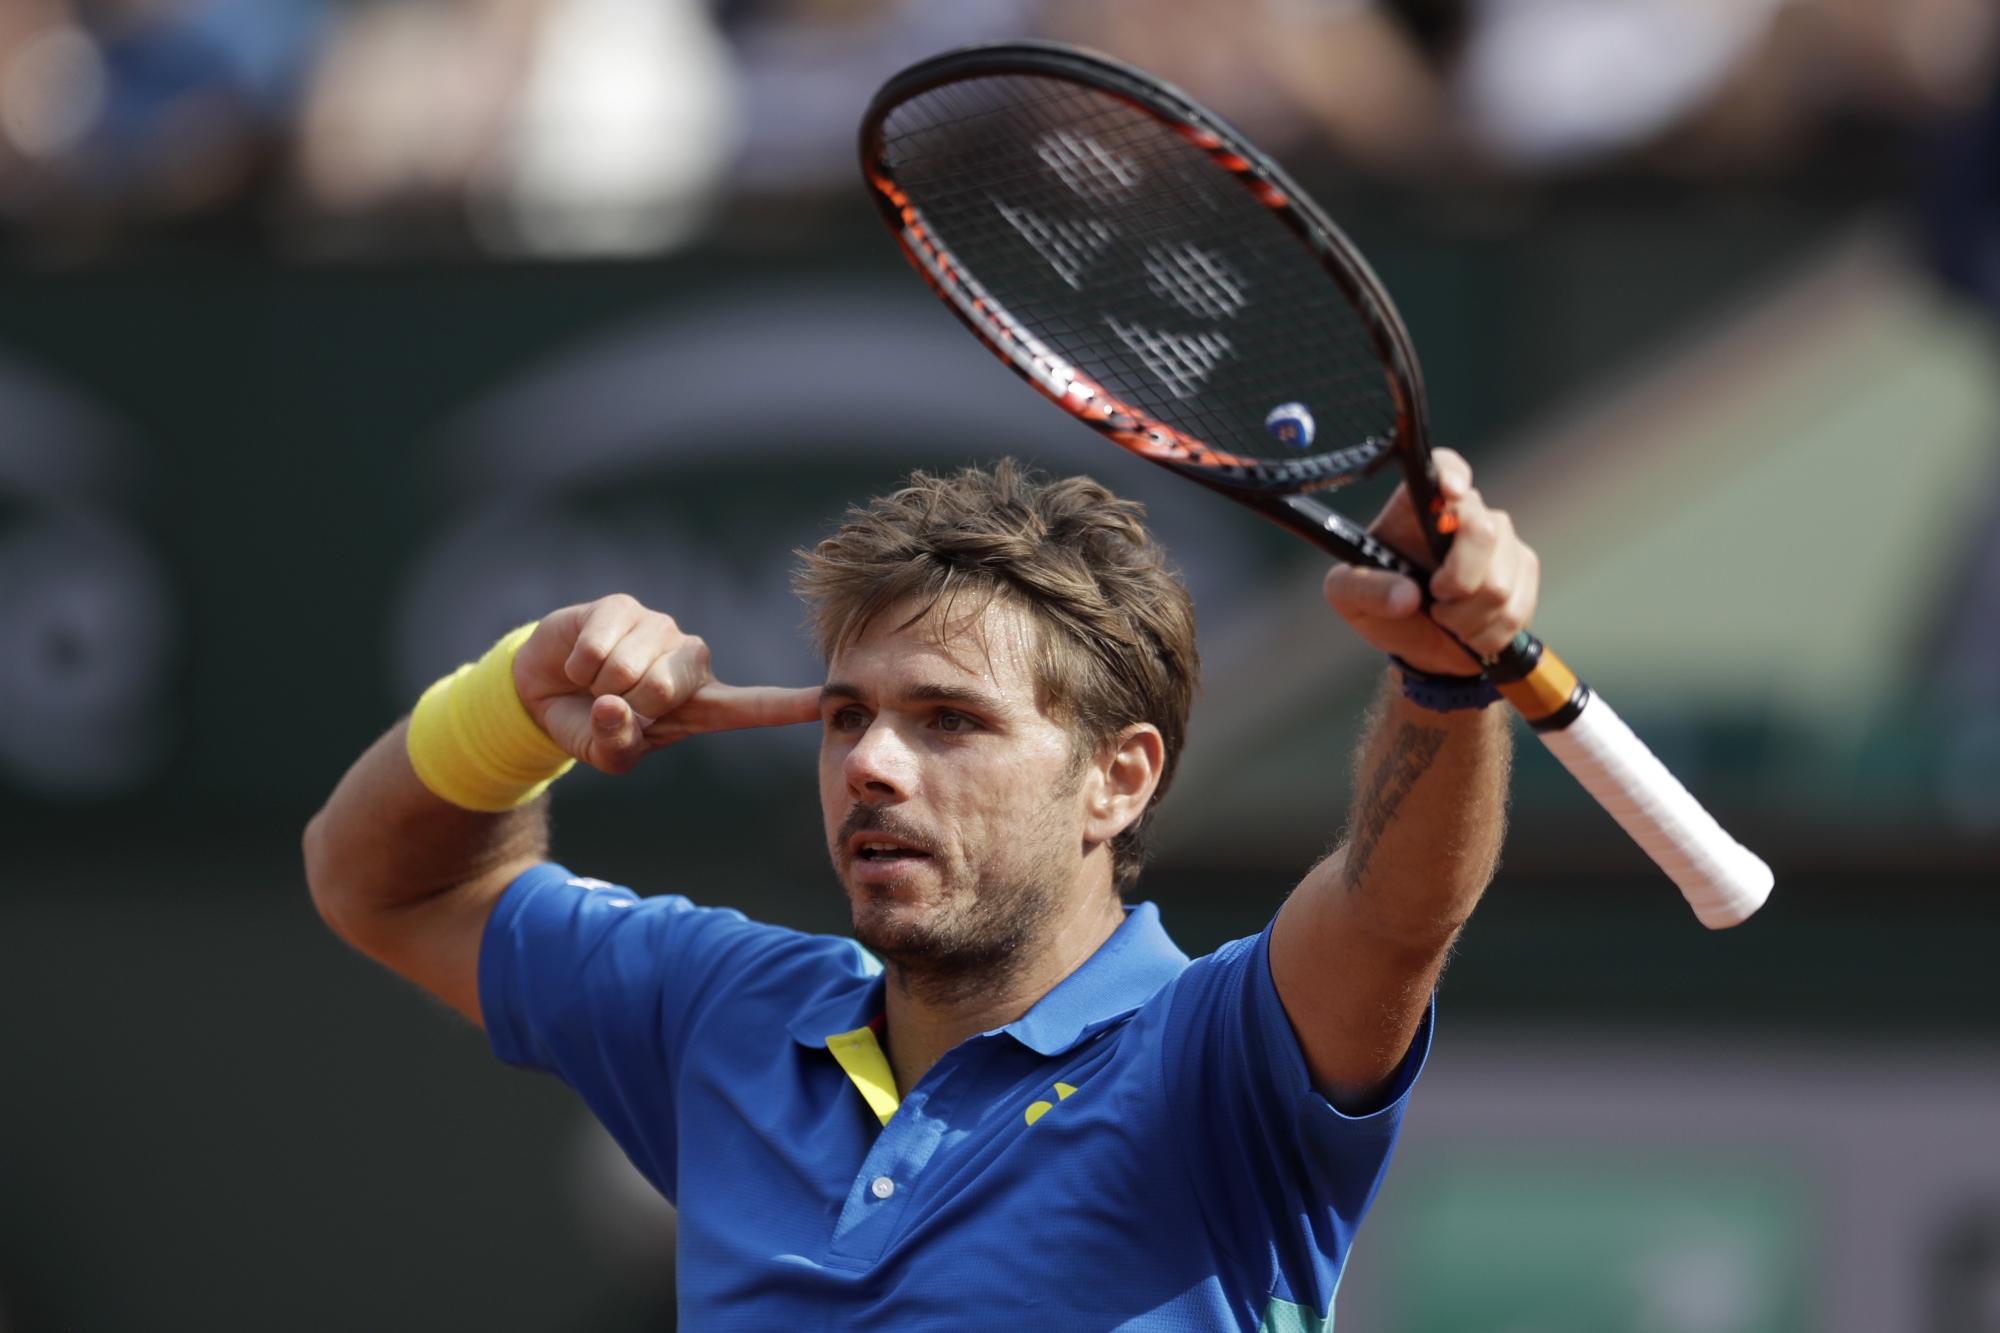 Switzerland's Stan Wawrinka celebrates winning his fourth round match of the French Open tennis tournament against France's Gael Monfils in three sets 7-5, 7-6 (9-7), 6-2, at the Roland Garros stadium, in Paris, France. Monday, June 5, 2017. (AP Photo/Petr David Josek)